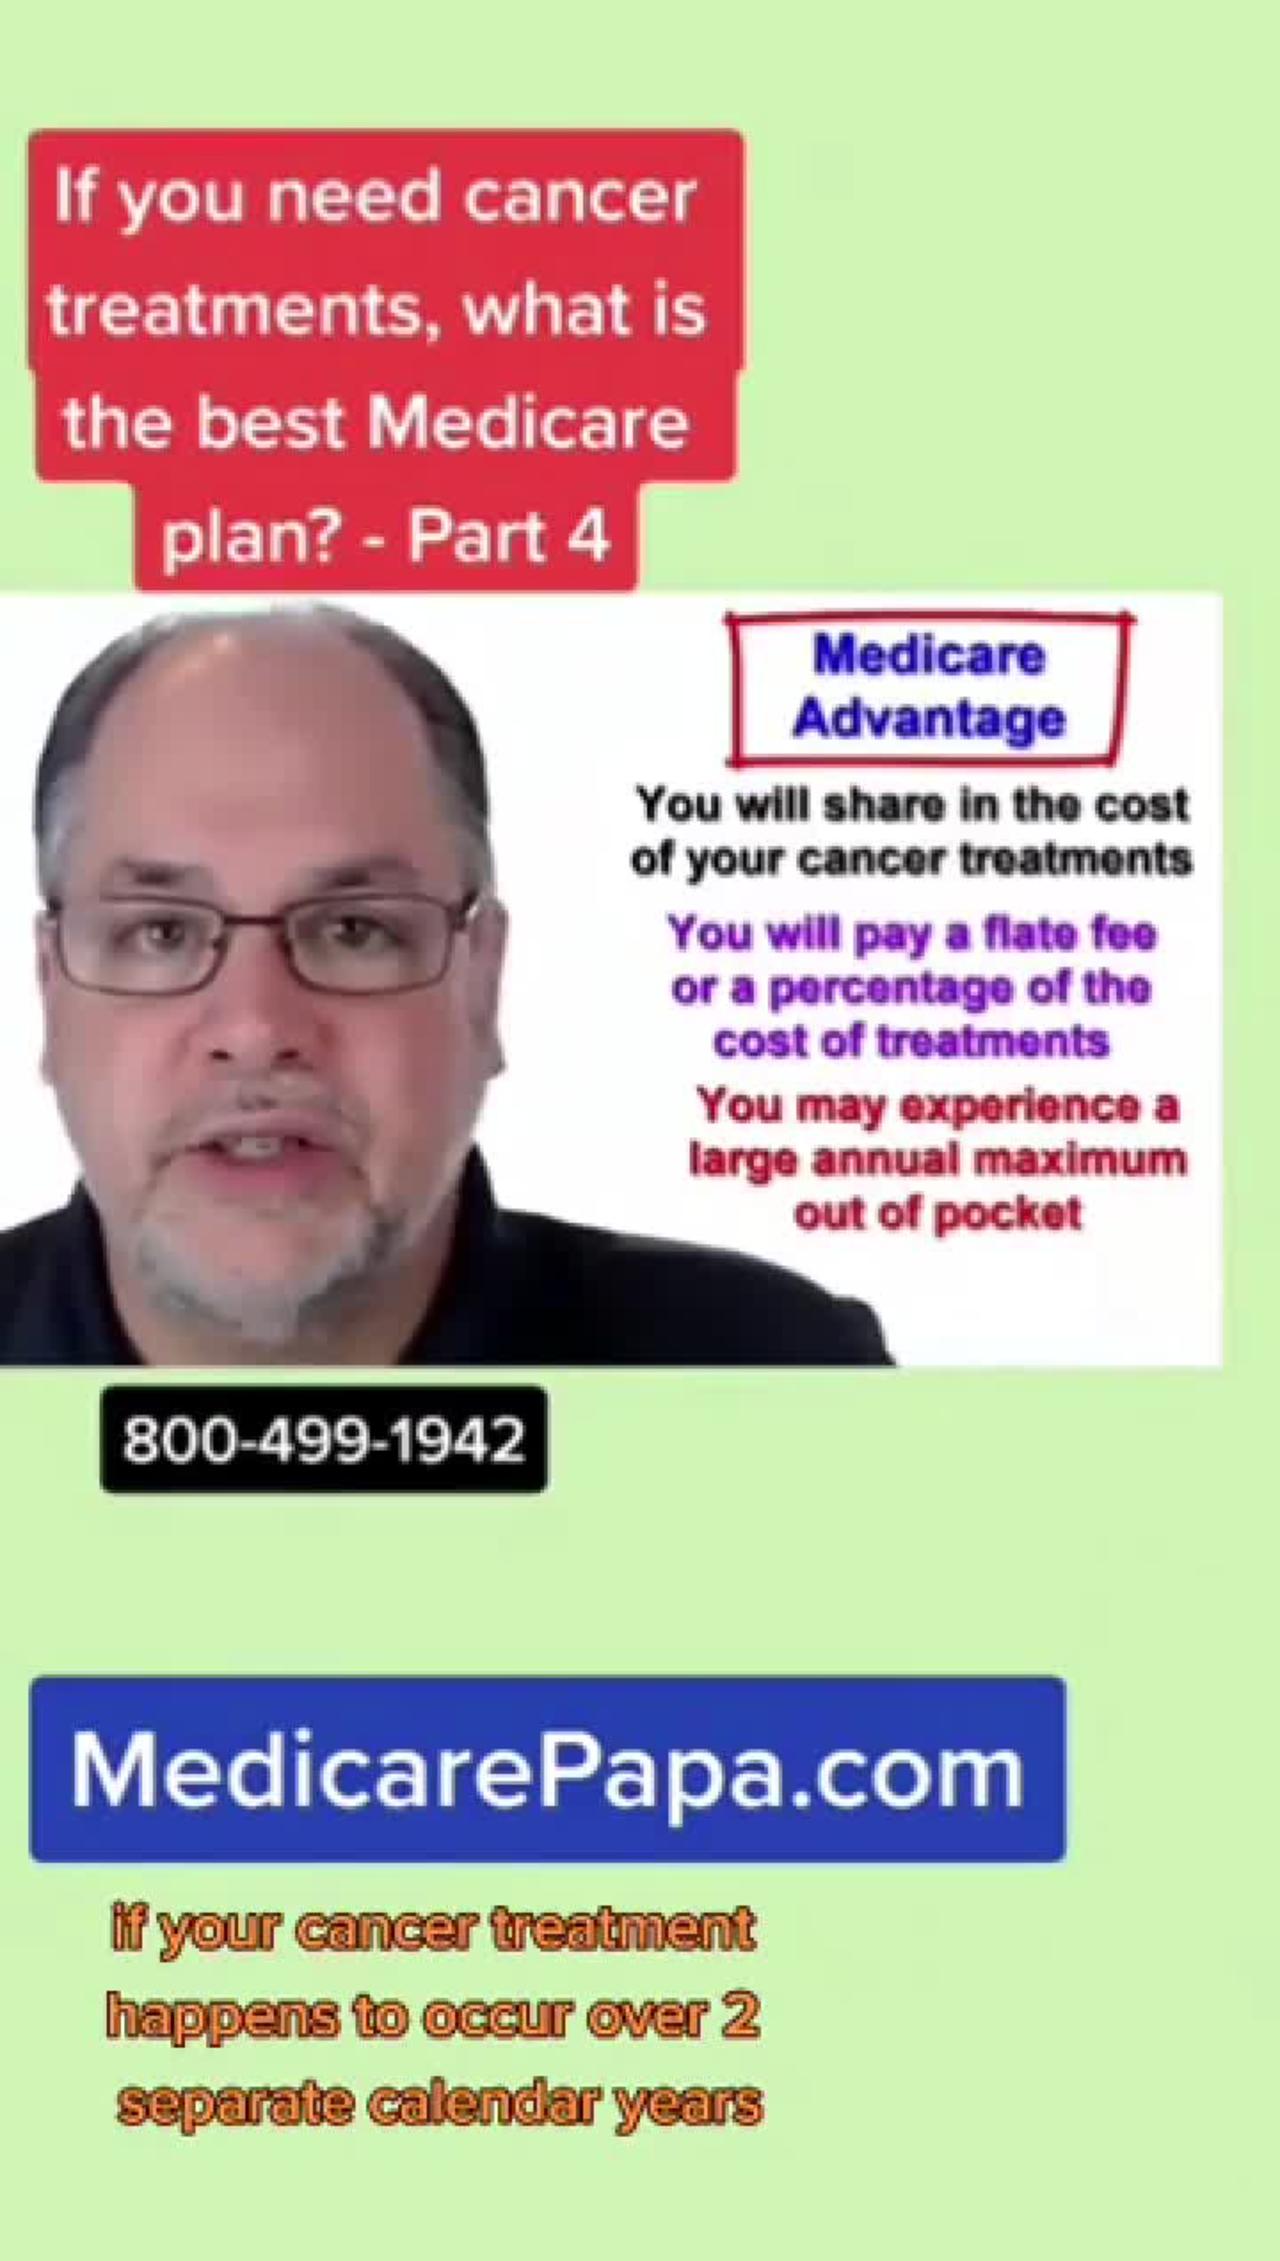 Episode 4 - Which type of Medicare health plan is the best if you need Cancer treatments?